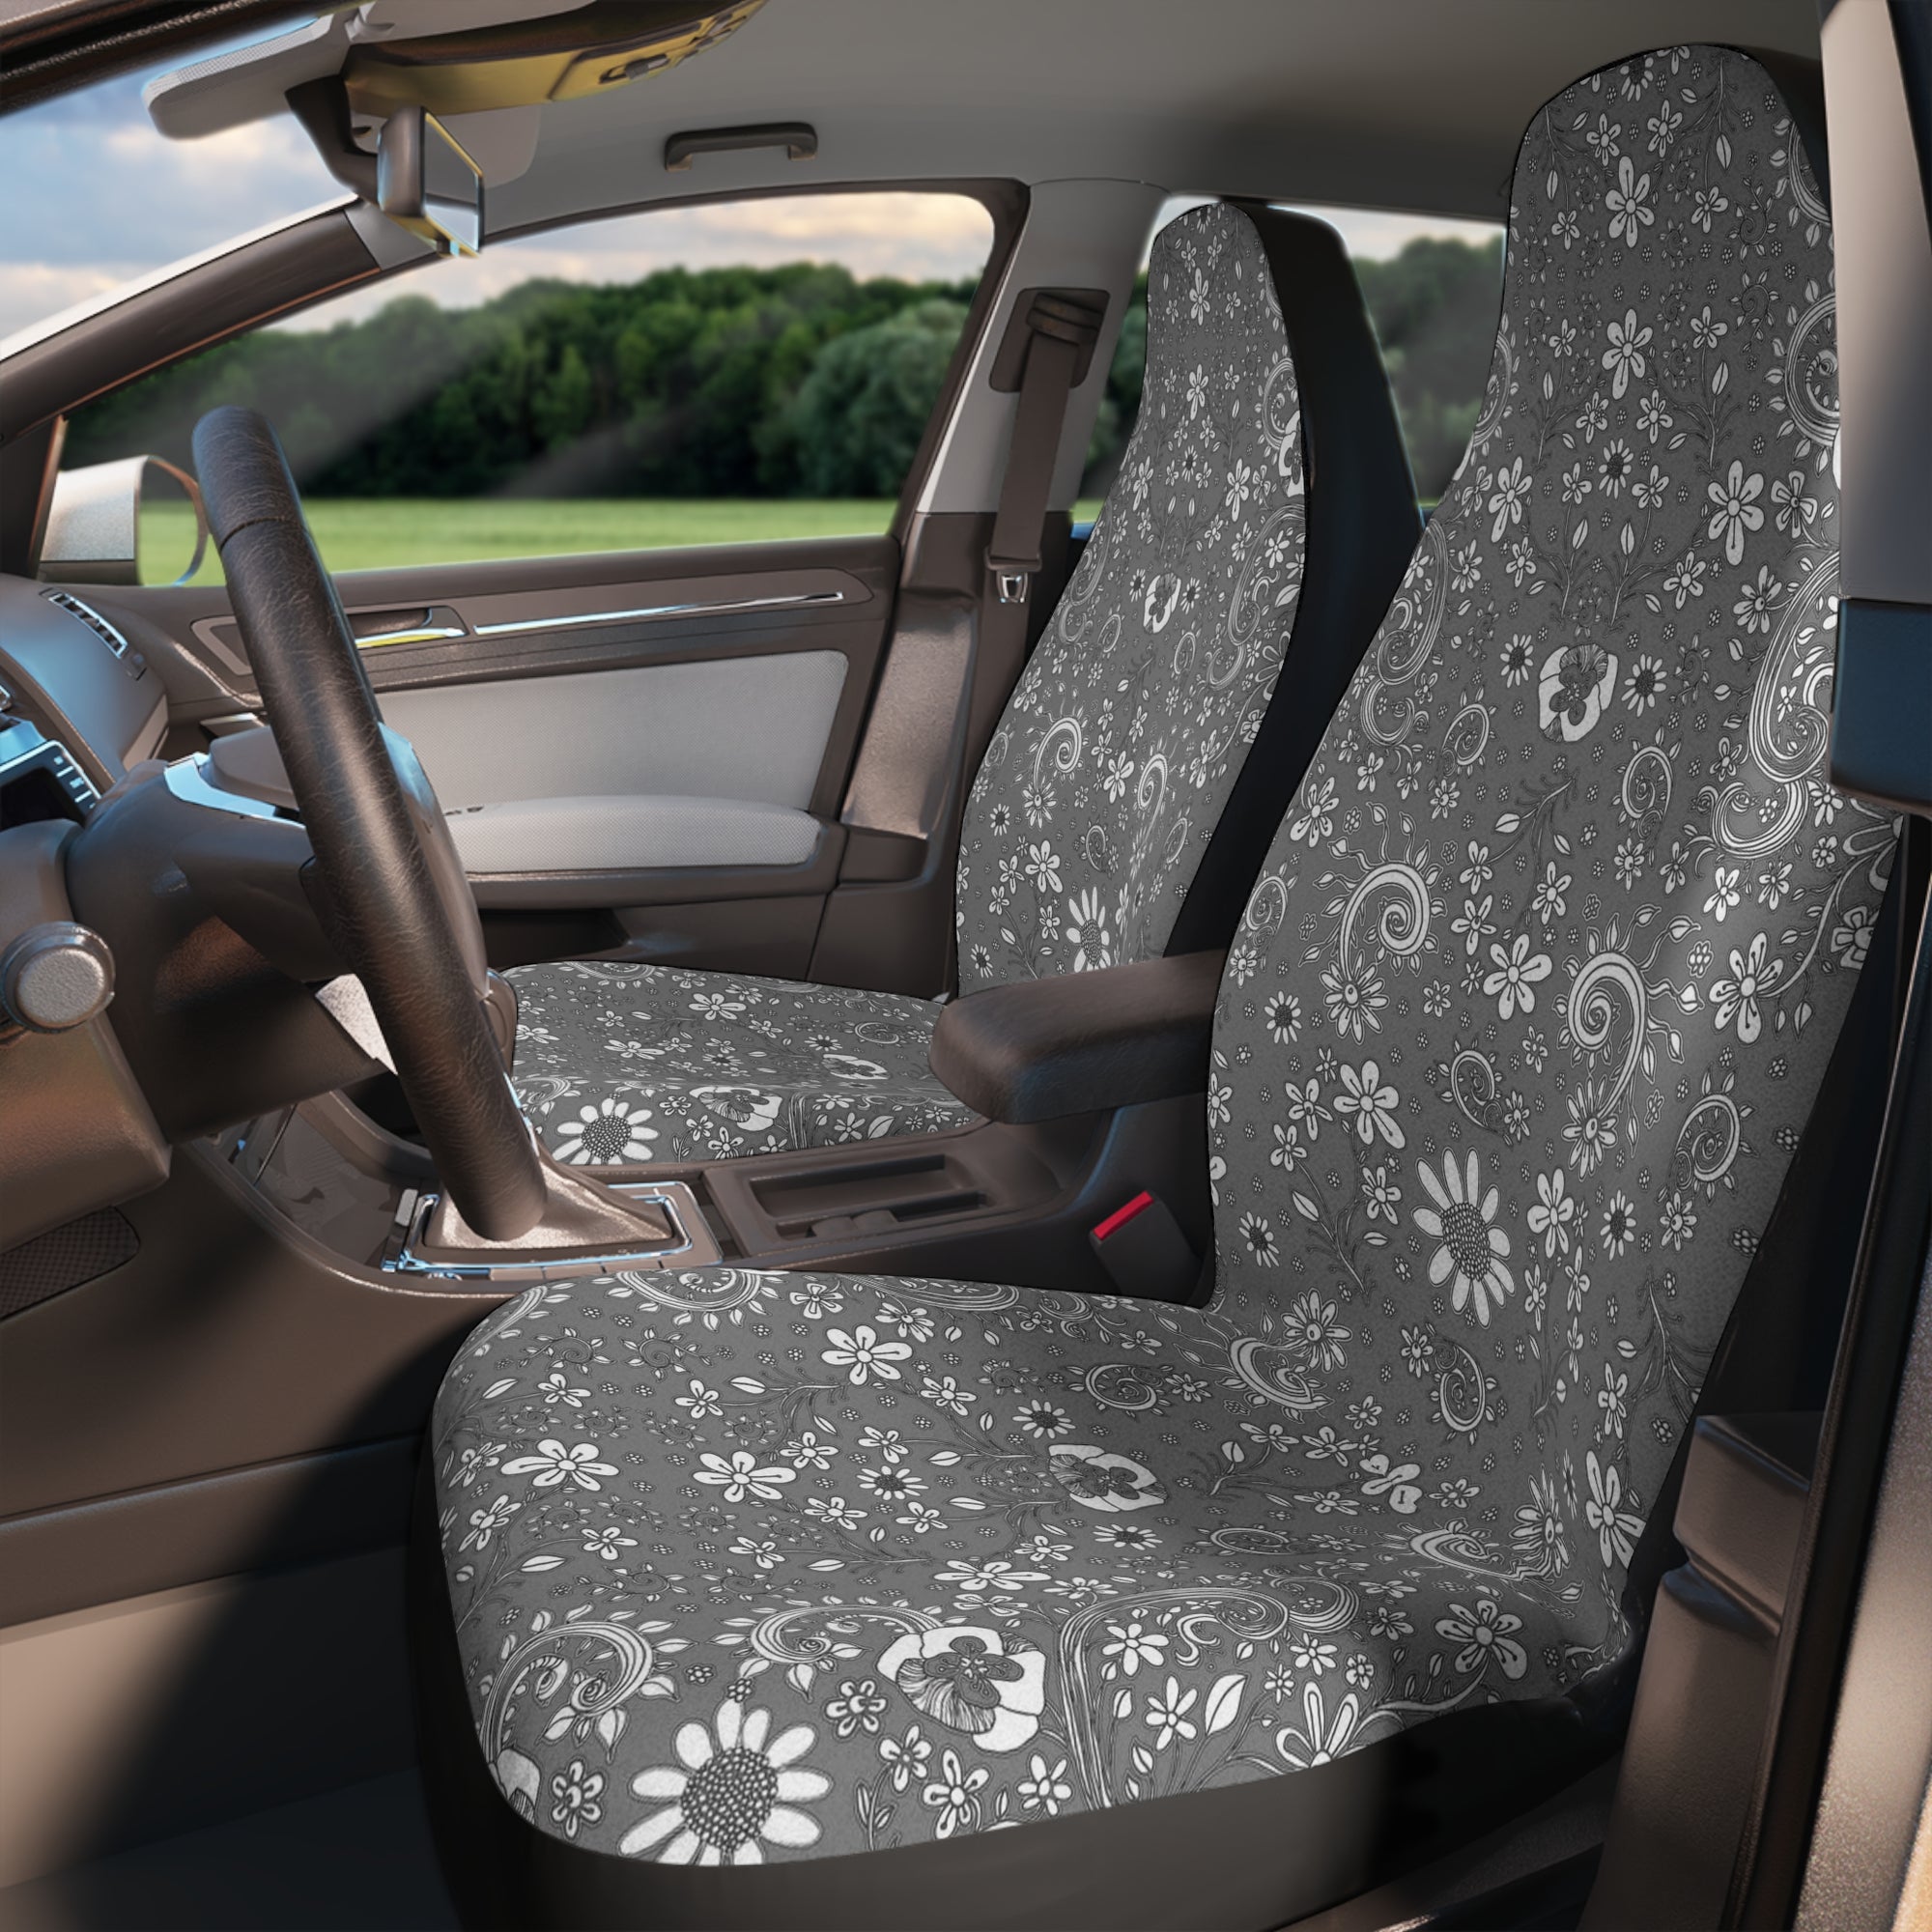 Floral Car Seat Covers Grey Original Flowers Birds Art on Car Seat Covers